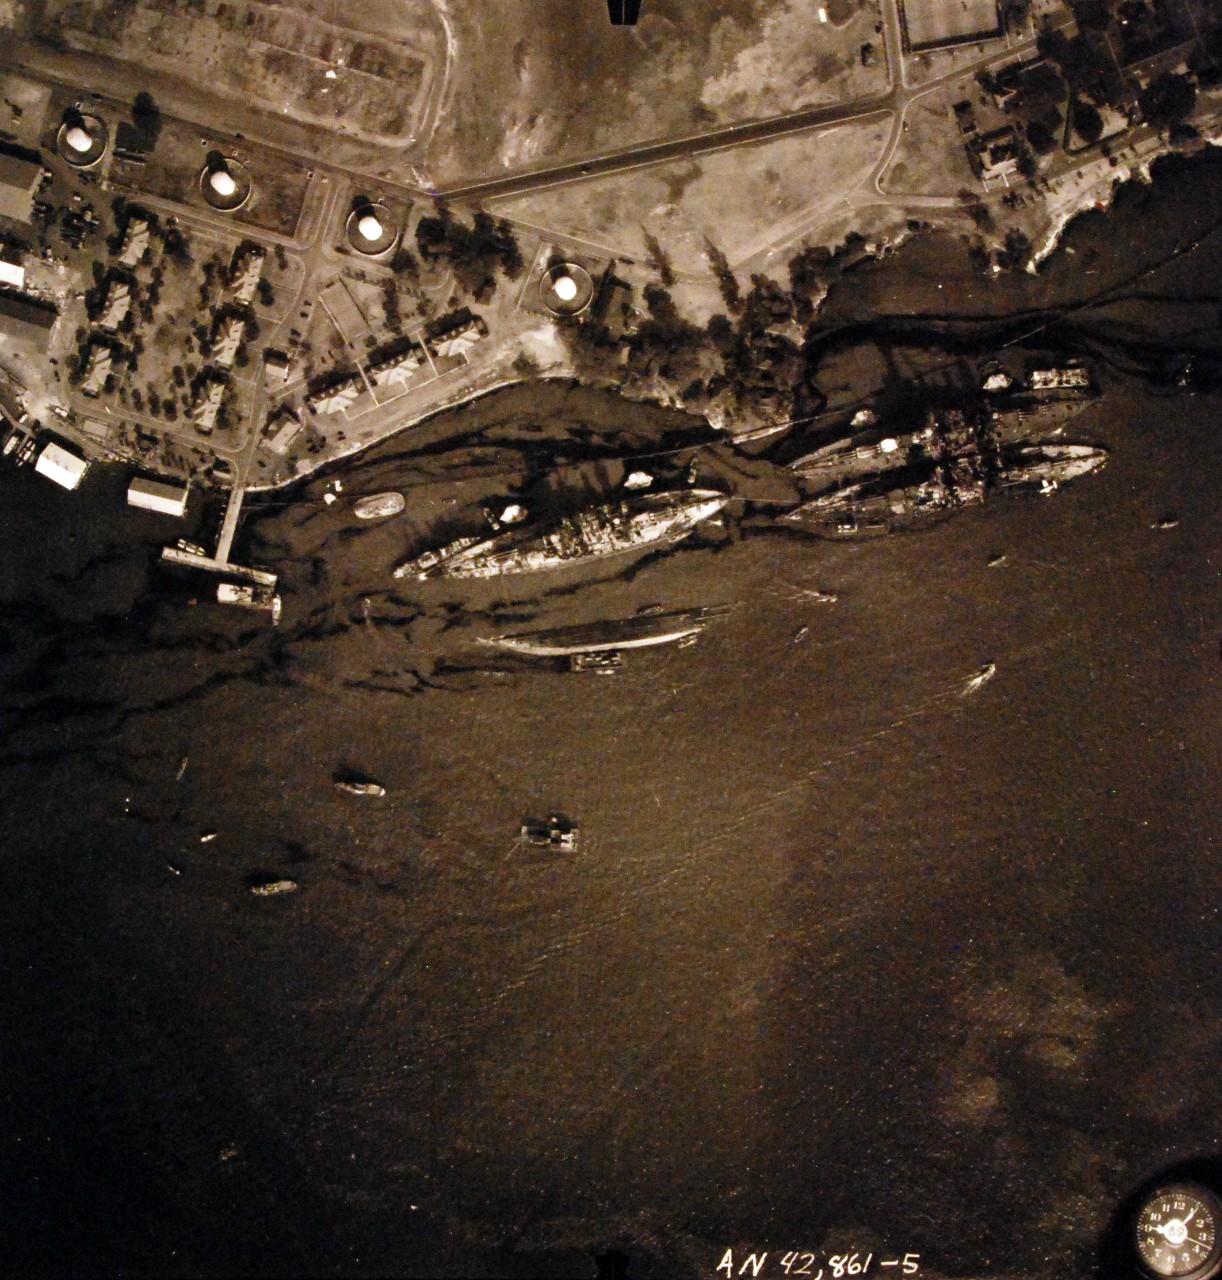 80-G-387566:  Pearl Harbor Attack, 7 December 1941.  Aerial view of "Battleship Row" moorings on the southern side of Ford Island, 10 December 1941, showing damage from the Japanese raid three days earlier.  Shown are: USS Oklahoma (BB-37), capsized; USS Tennessee (BB-43), lightly damaged, with the sunken USS West Virginia (BB-48).  Note dark oil streaks on the harbor surface, originating from the sunken battleships. Photographed by VJ-1 at an altitude of 3,000 feet and released November 9, 1950.  (9/22/2015).